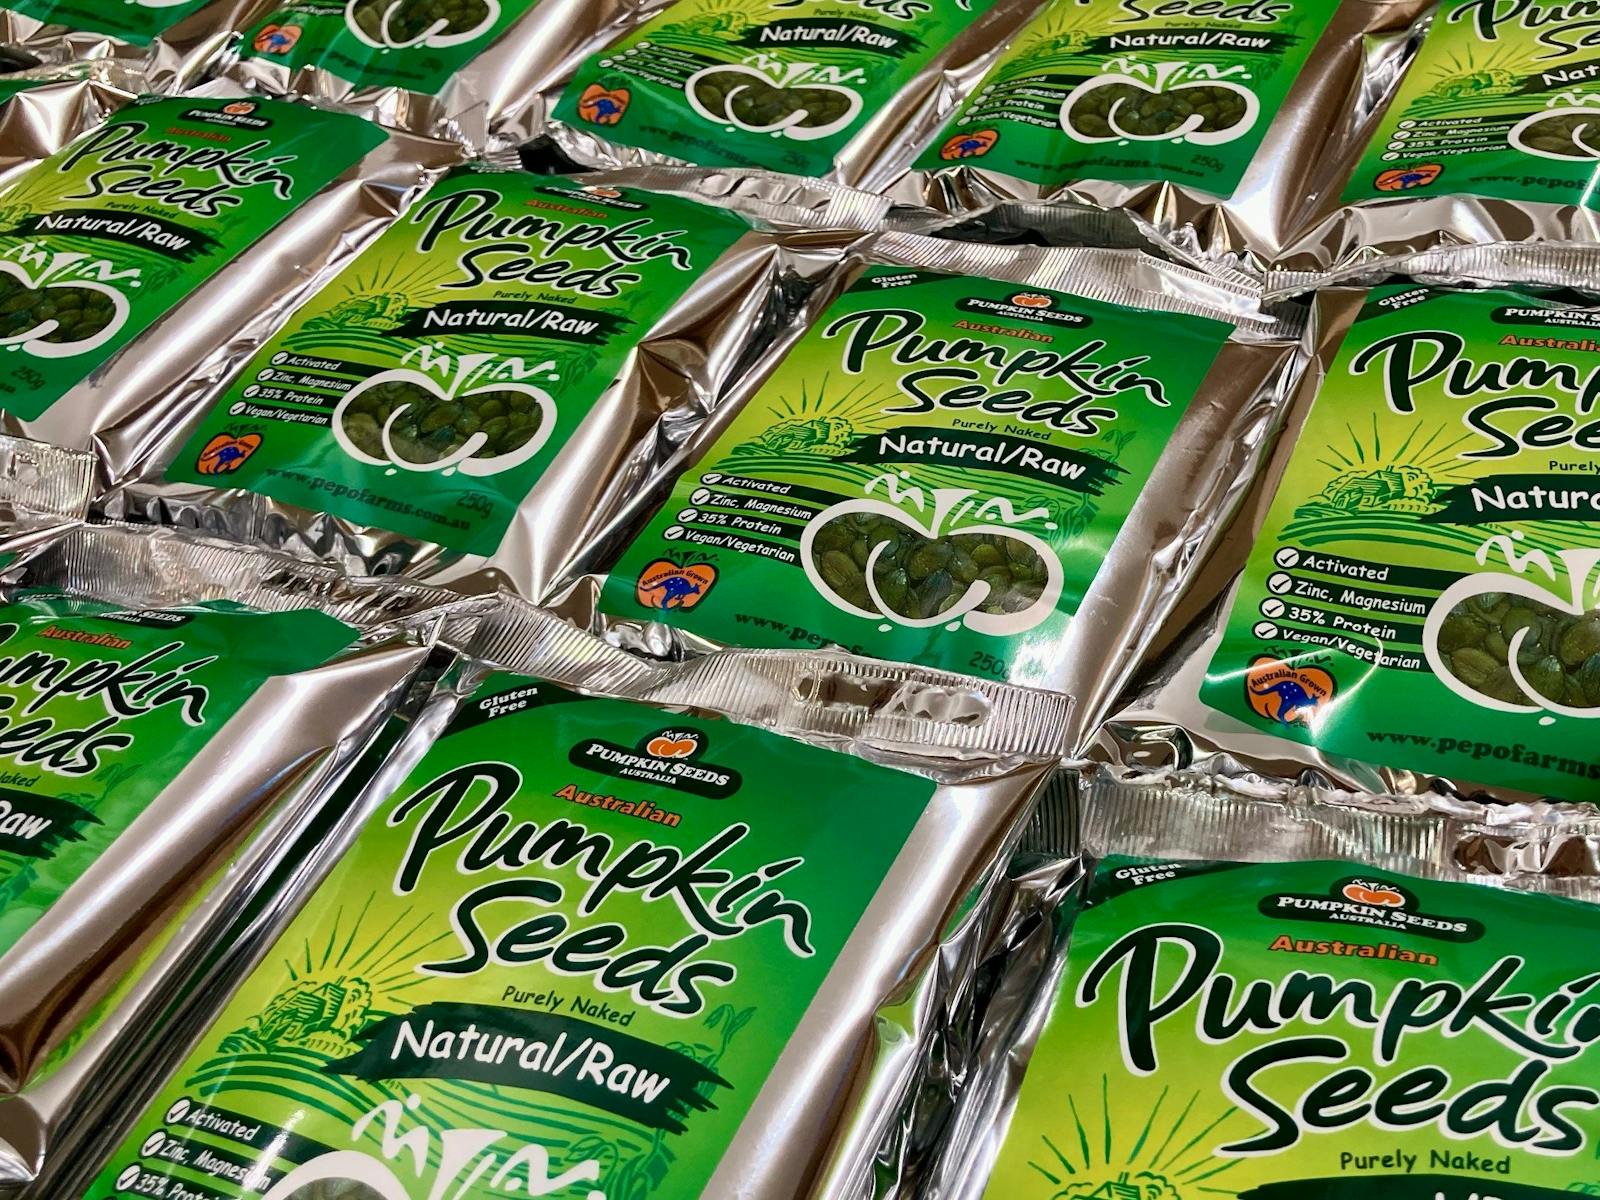 Packets of the only Australian Grown Pumpkin Seeds grown at Pepo Farms